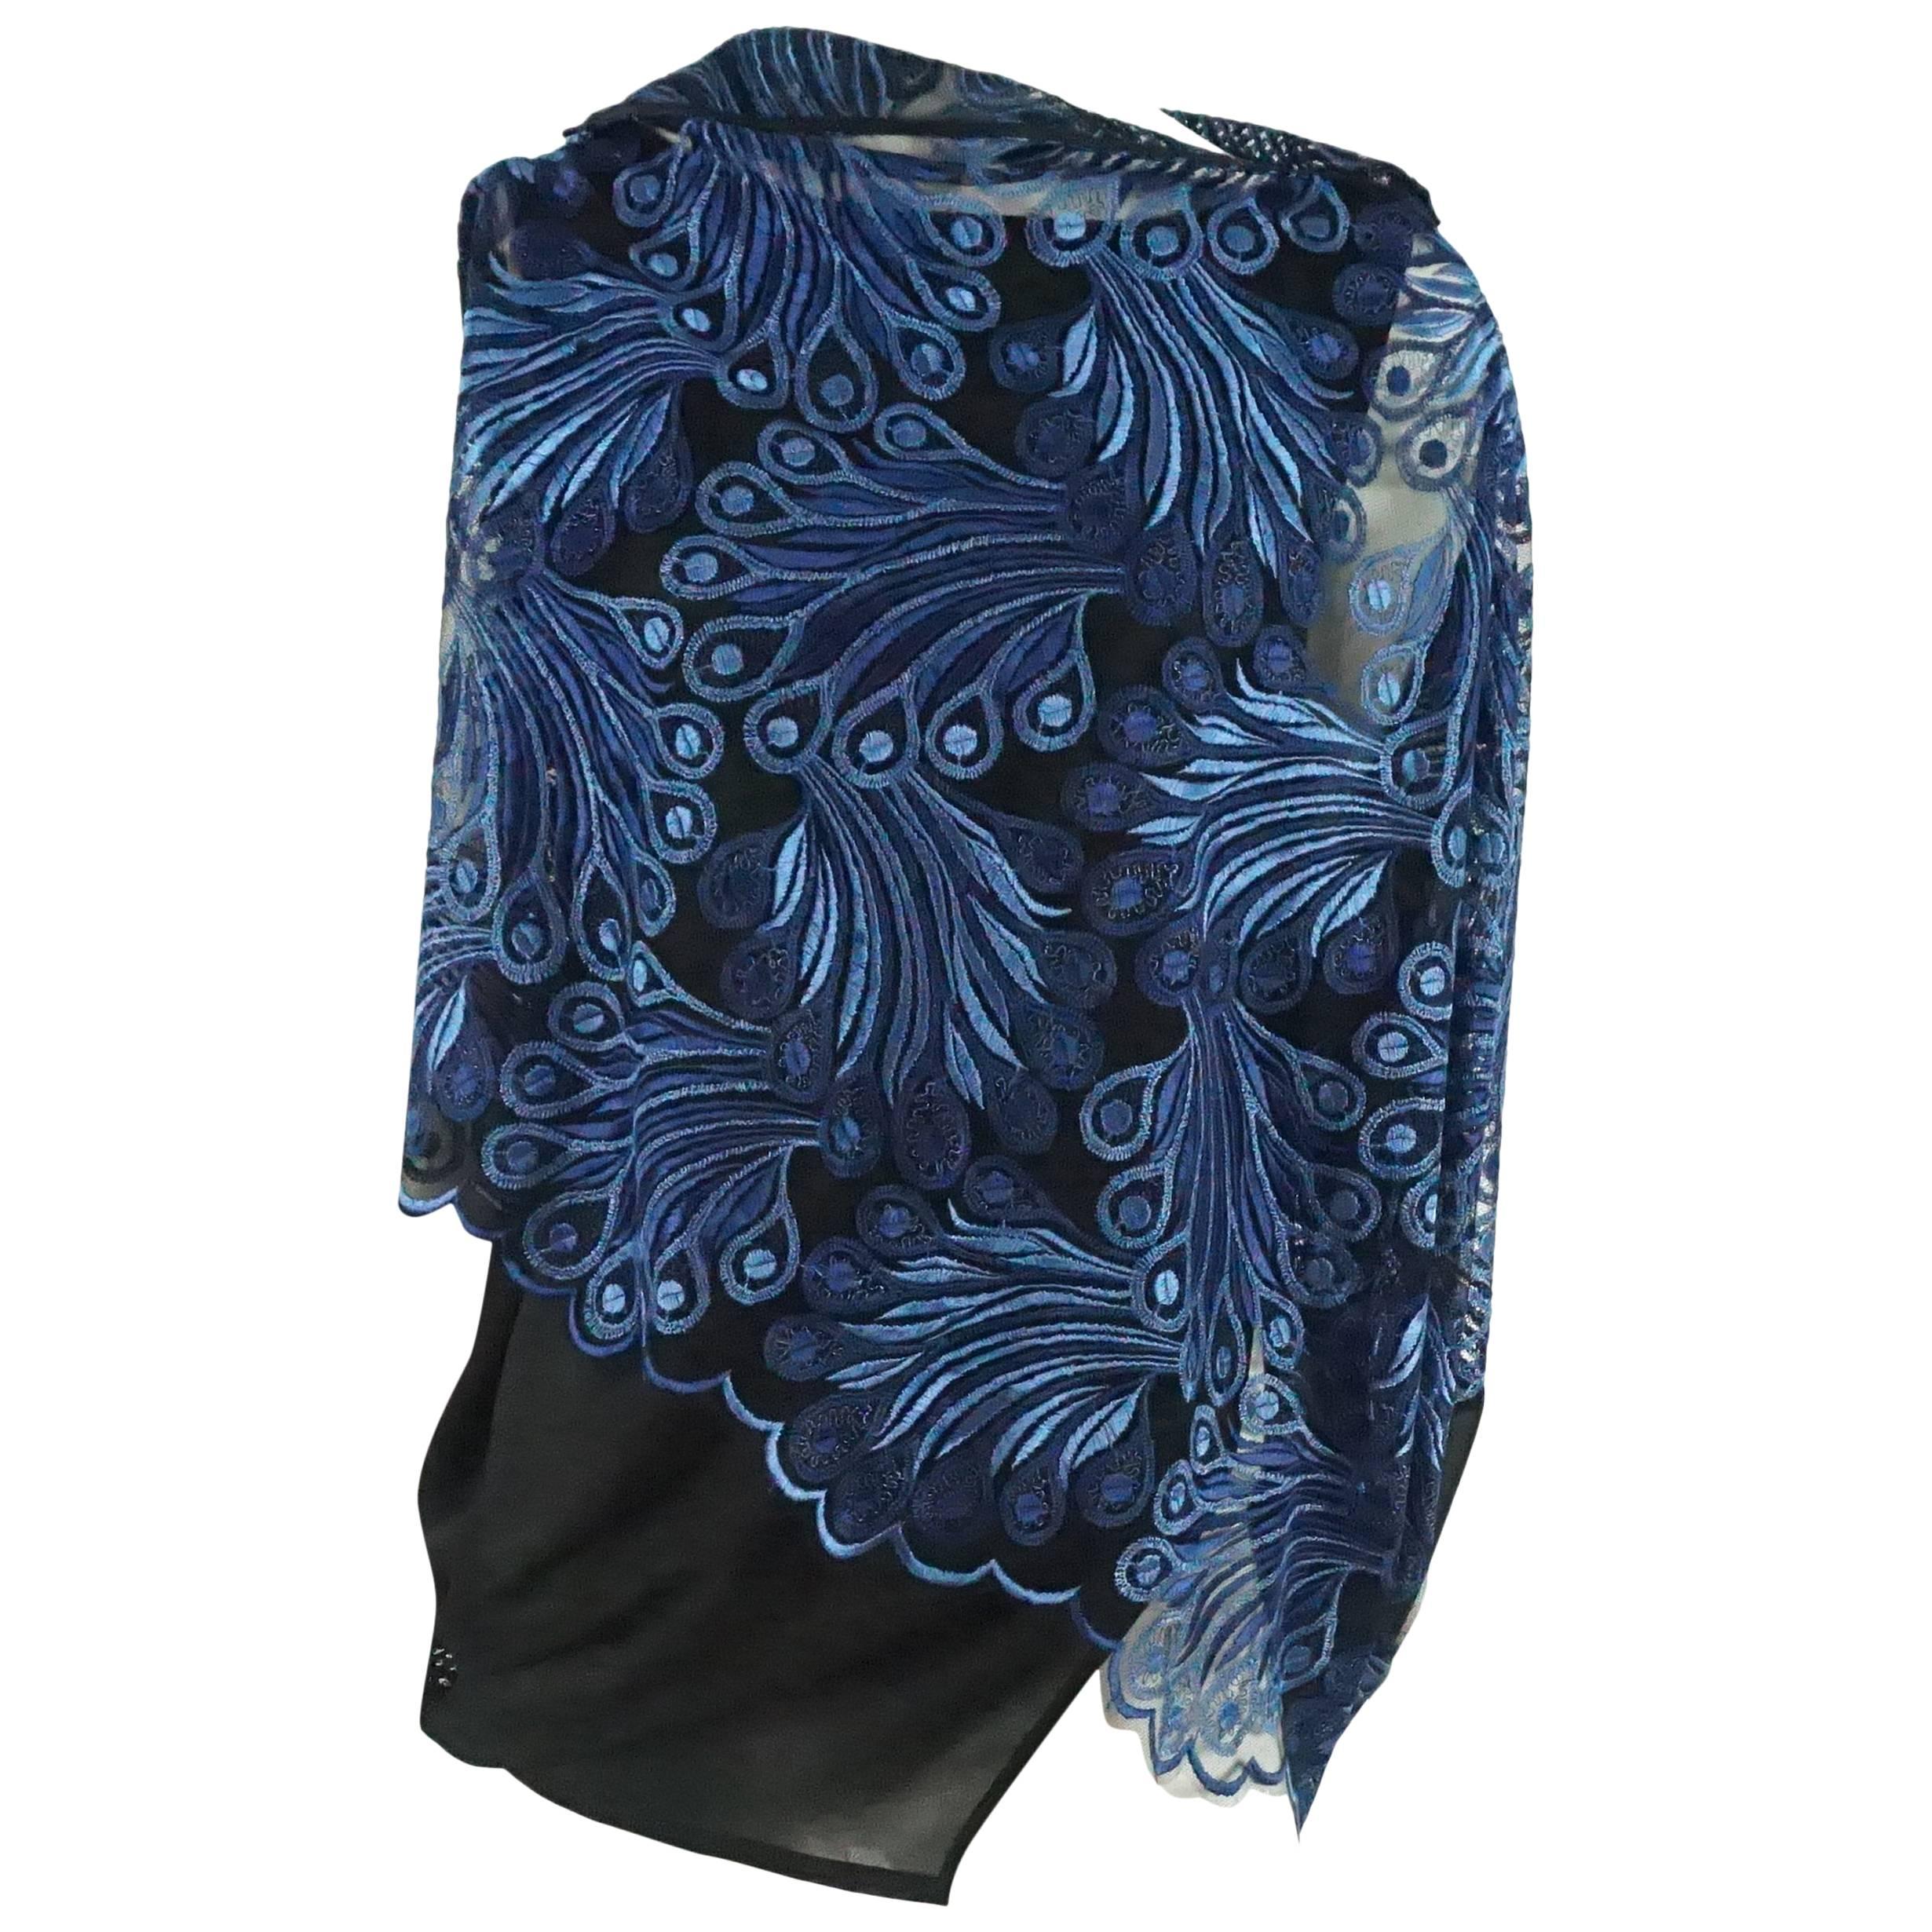 Junya Watanabe Comme des Garcons Blue and Black Lace Top - S